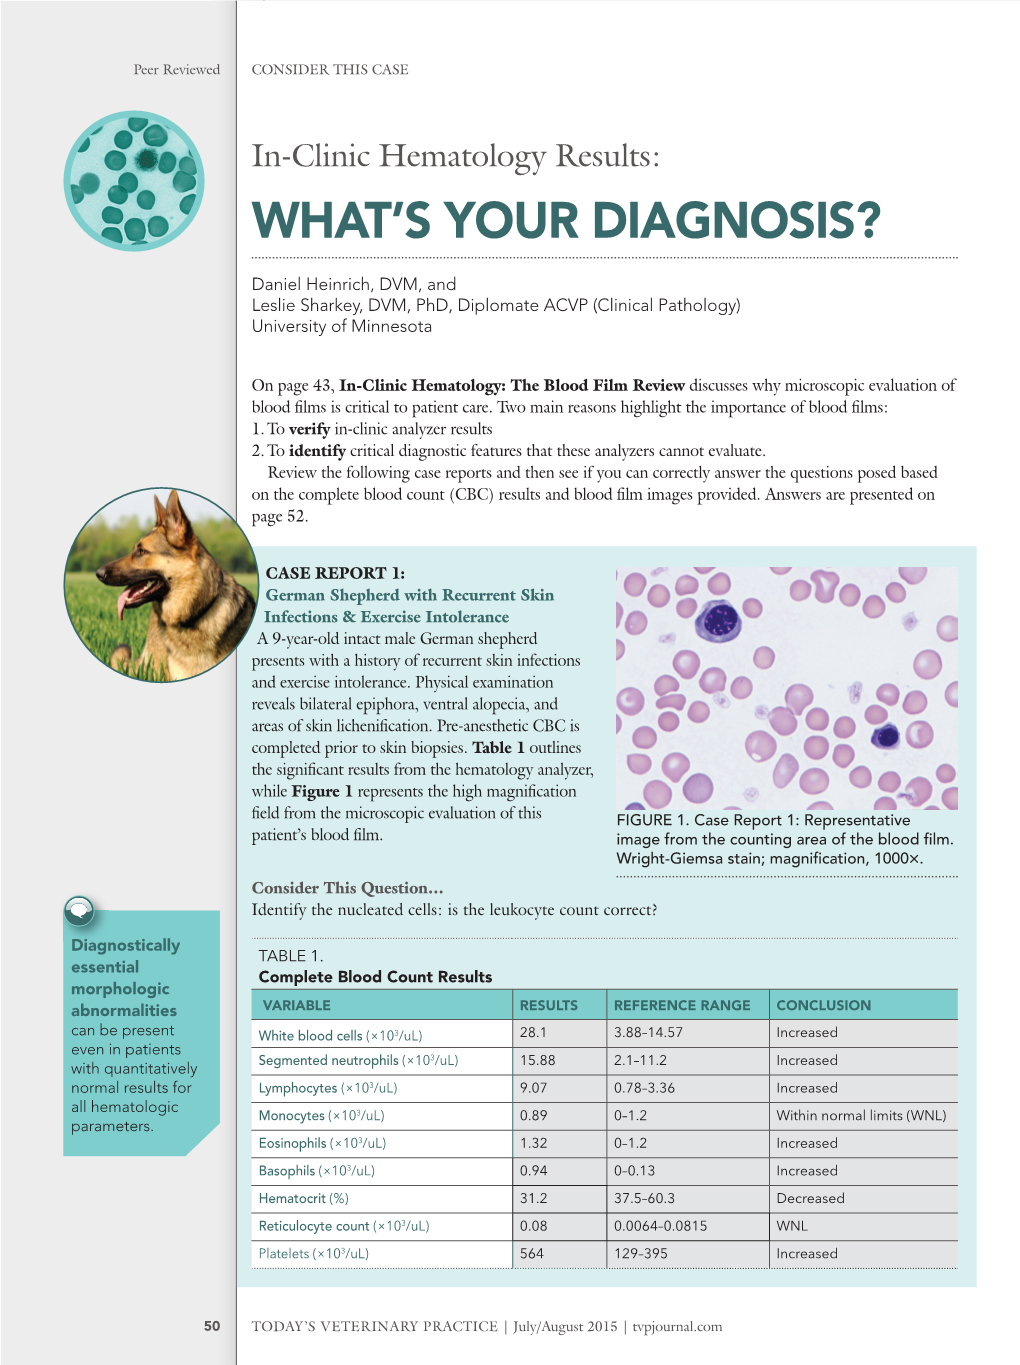 In-Clinic Hematology Results: WHAT’S YOUR DIAGNOSIS? Daniel Heinrich, DVM, and Leslie Sharkey, DVM, Phd, Diplomate ACVP (Clinical Pathology) University of Minnesota